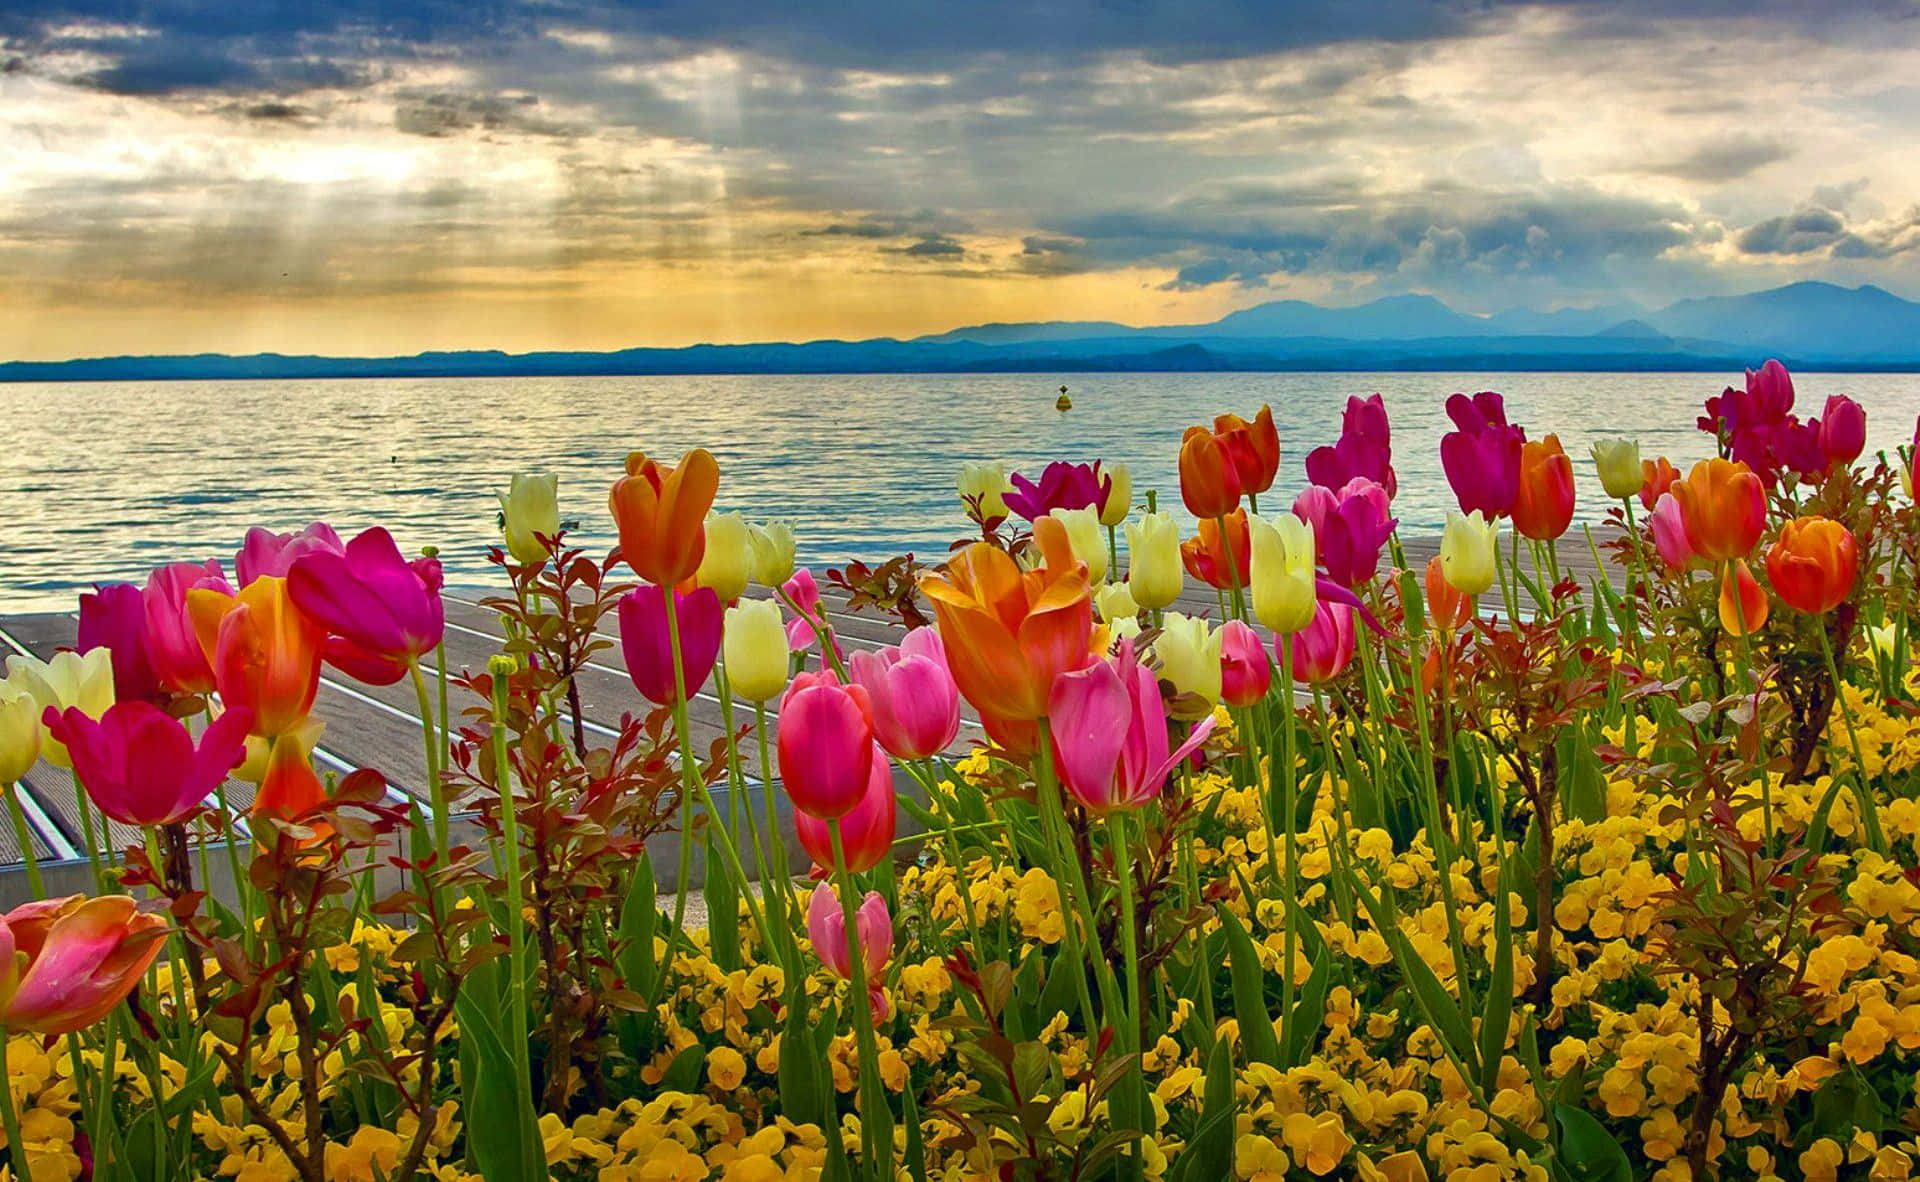 Enjoy the beauty of spring in bloom!